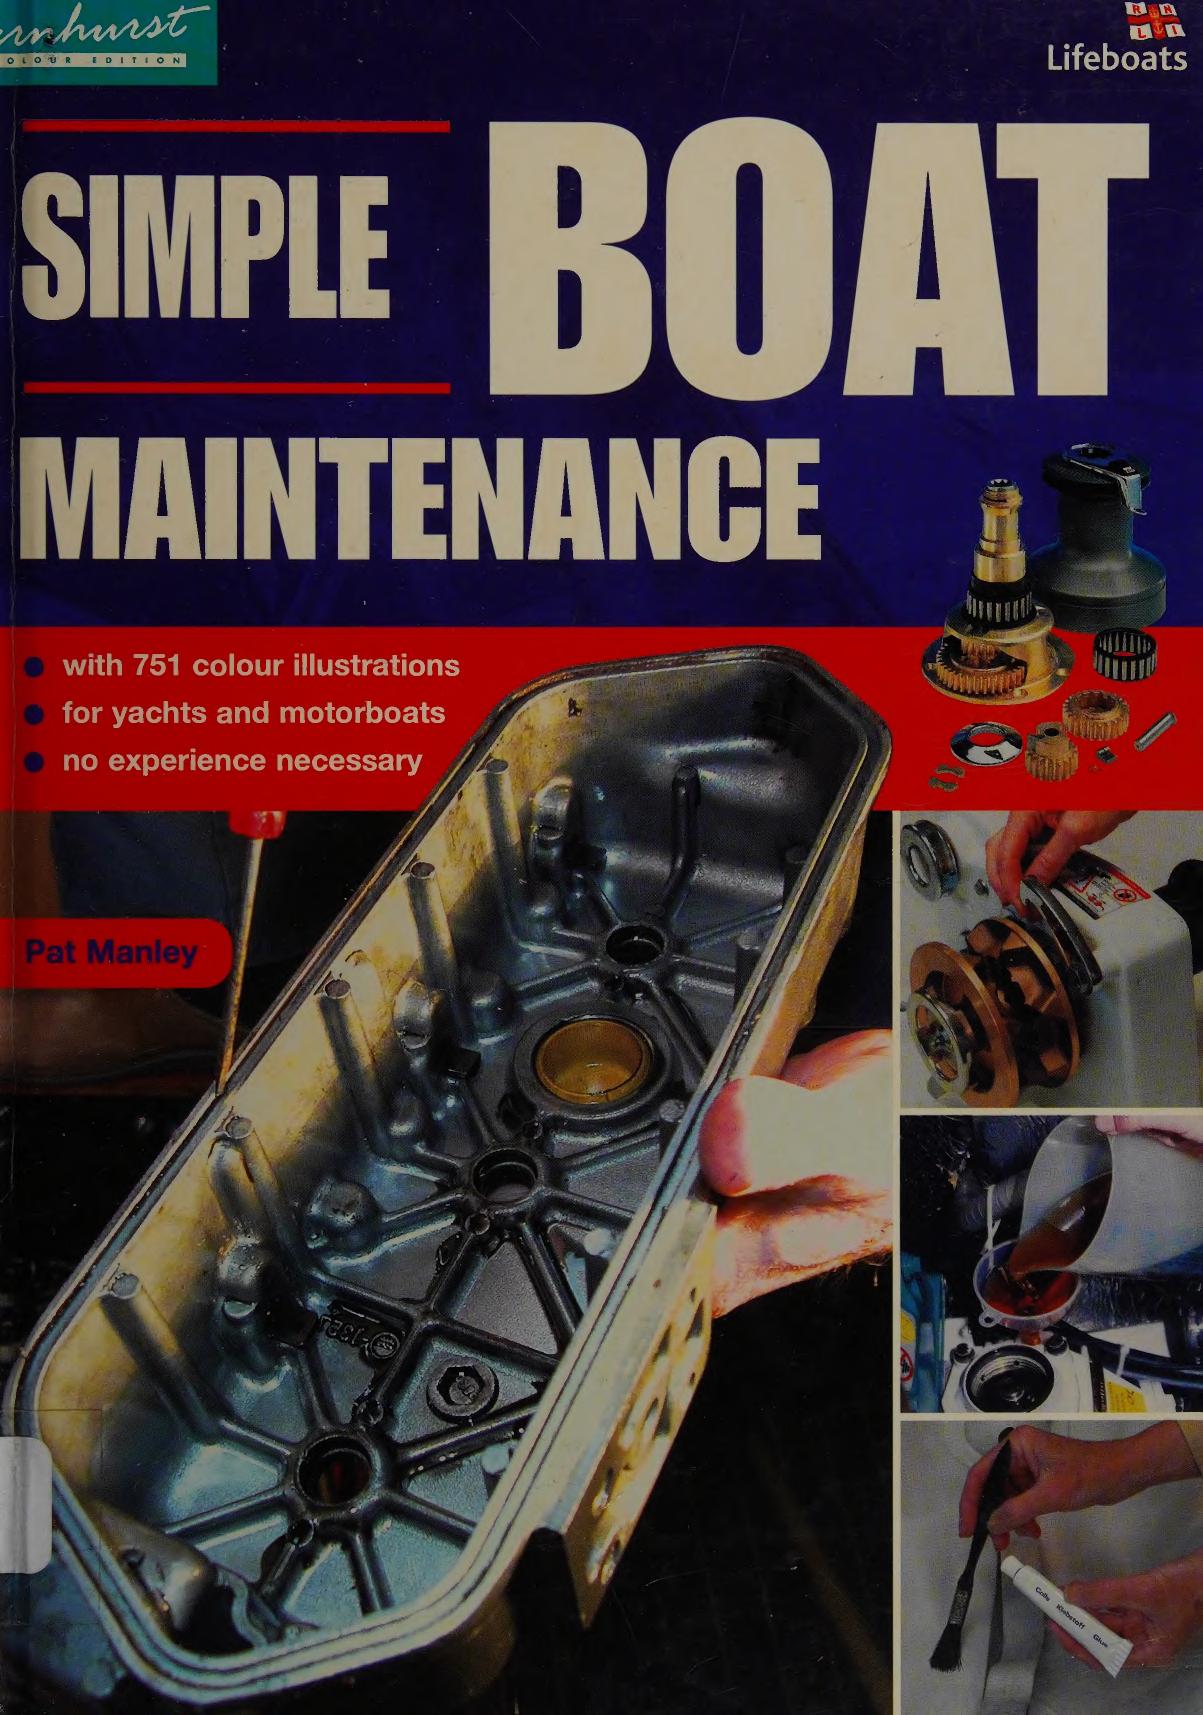 Simple boat maintenance by Manley Pat